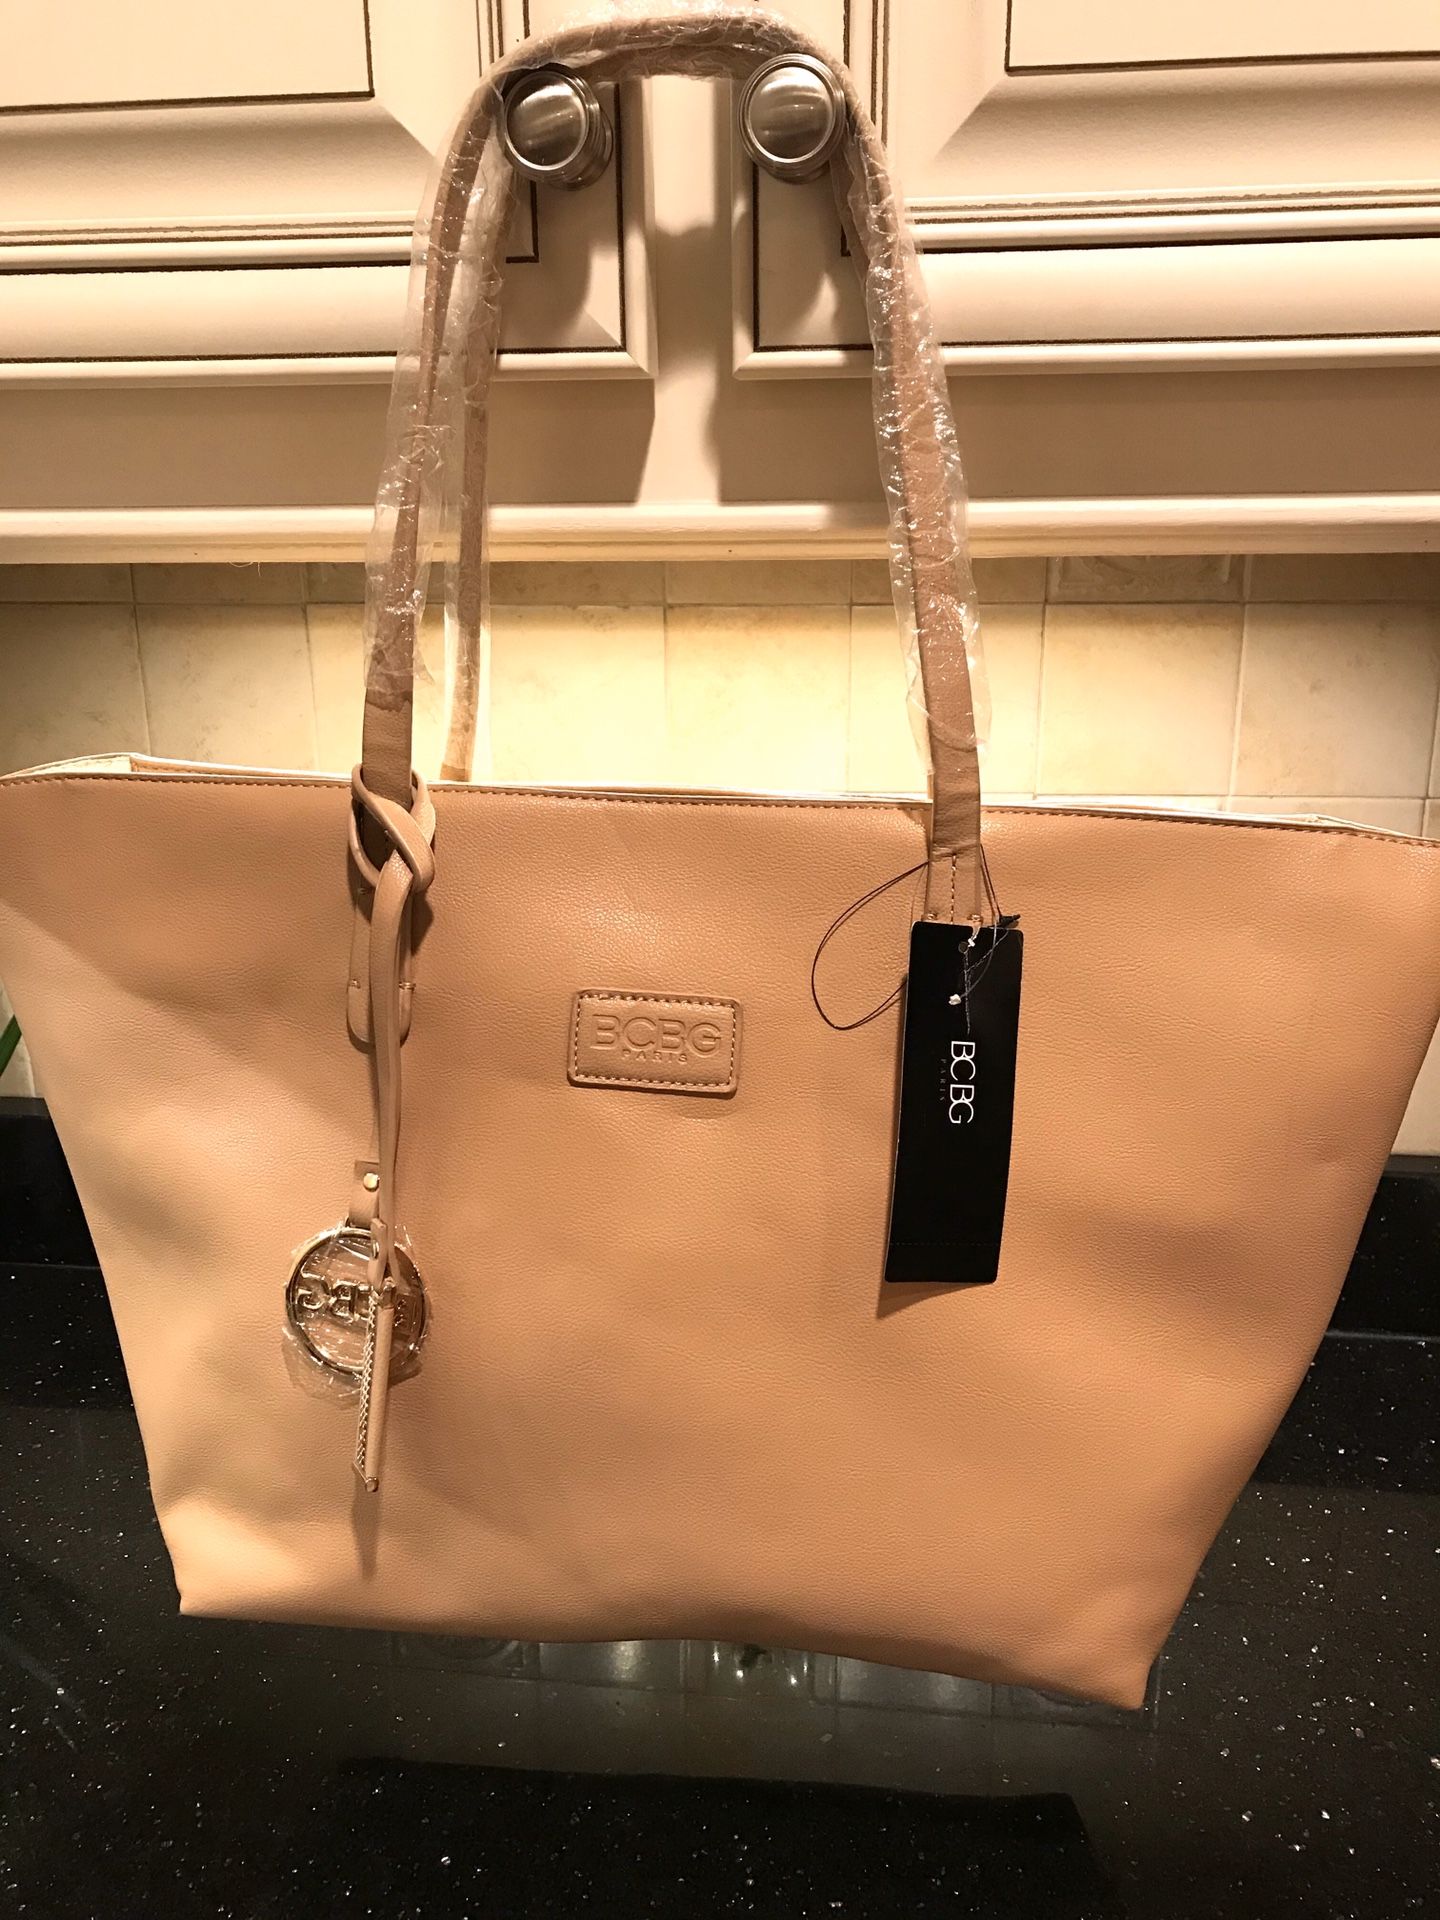 BCBG Vinyl Bag with purse included (which has removable shoulder strap)